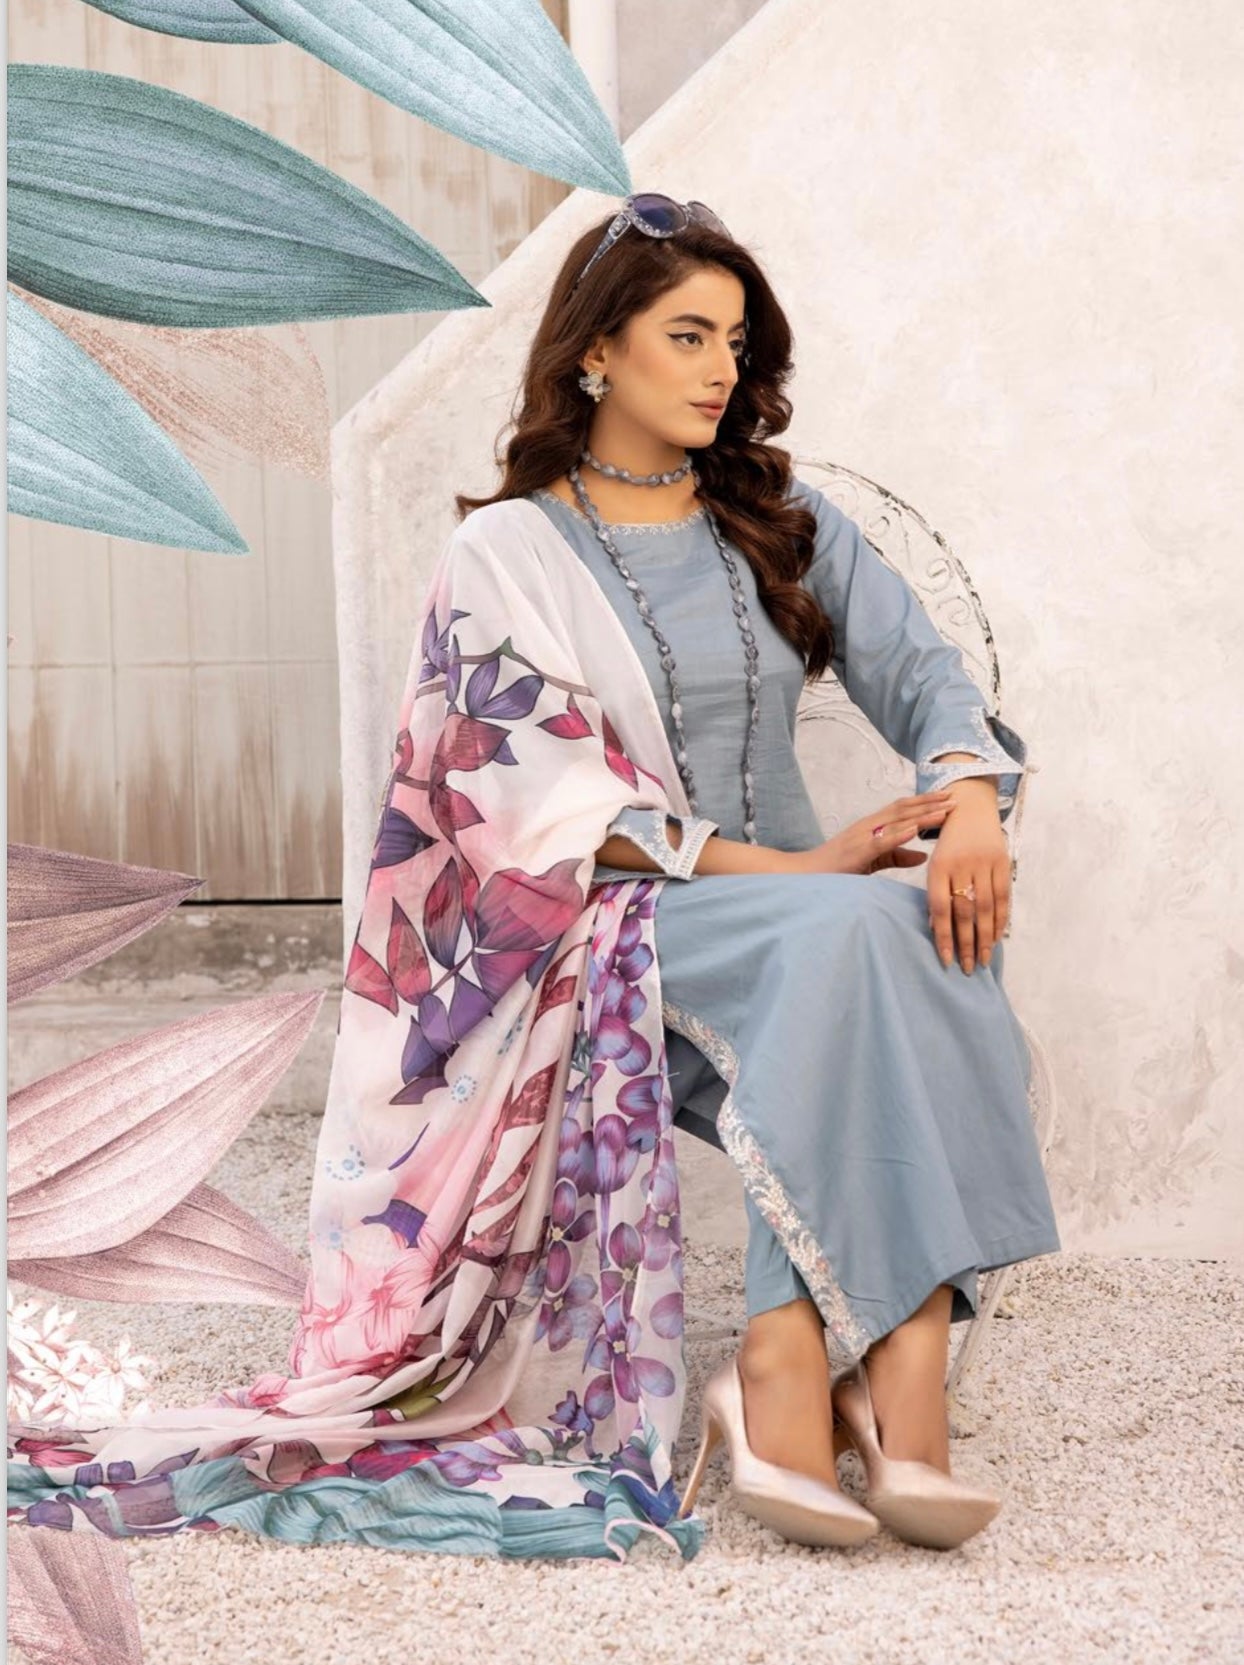 FLORENCE By SIMRANS Cotton collection 3PC cutwork embroidered readymade suit GREY